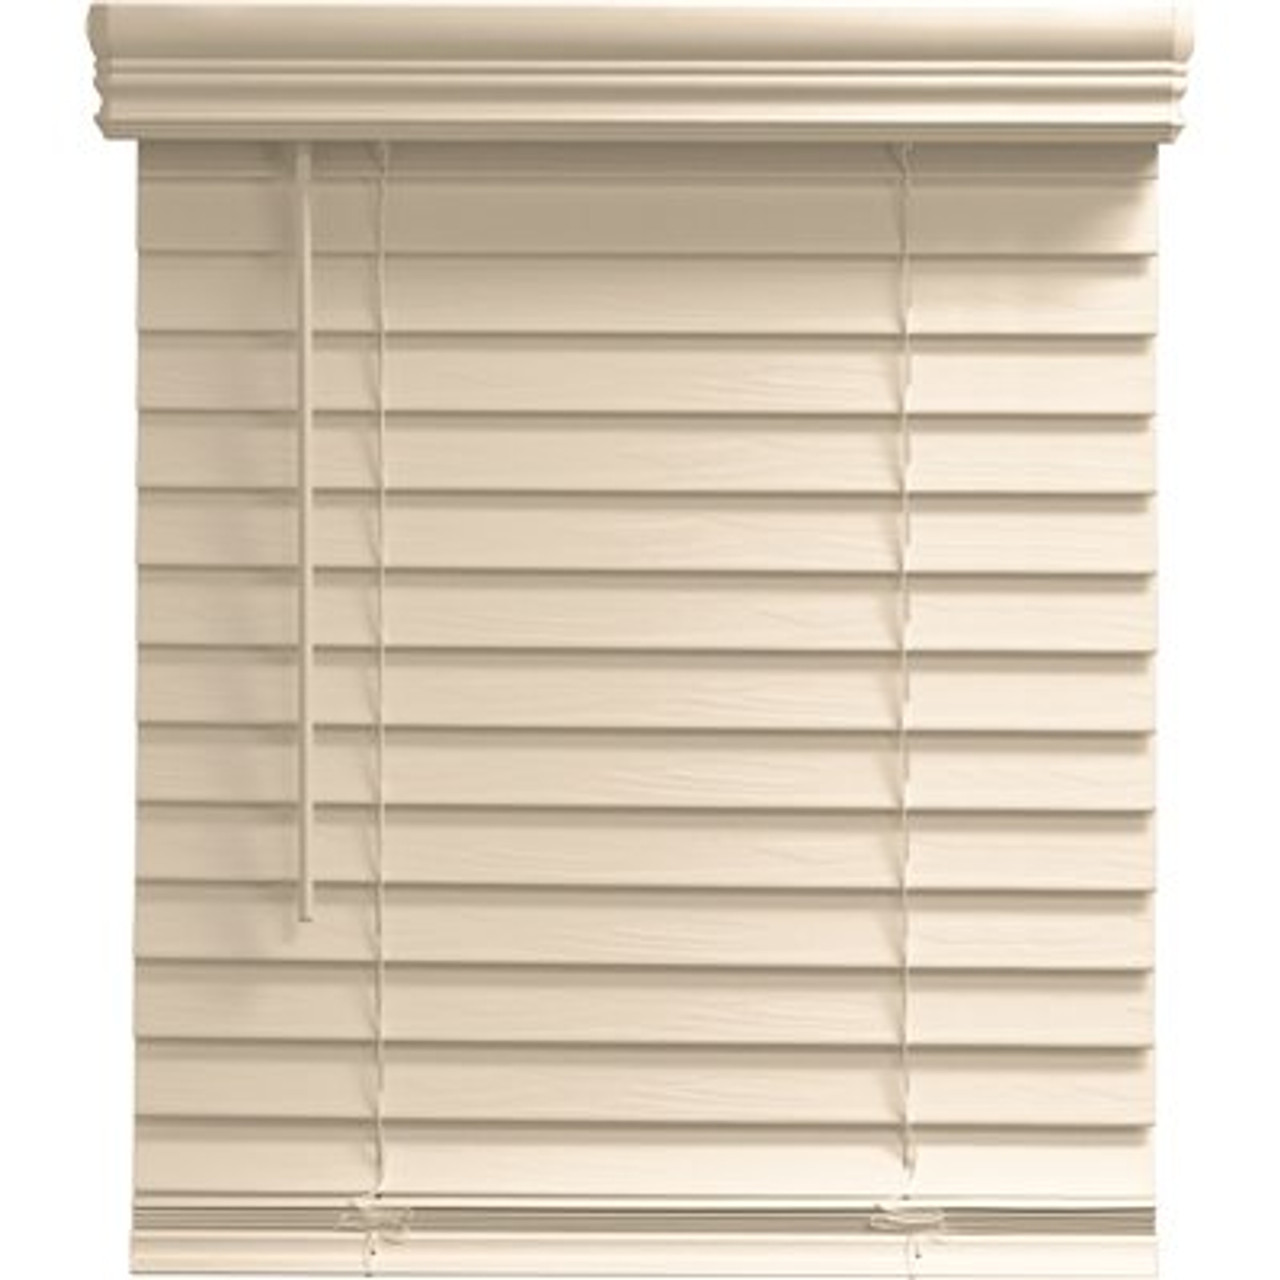 Champion TruTouch 29x72" Cordless 2" Faux Wood Blind Alabaster